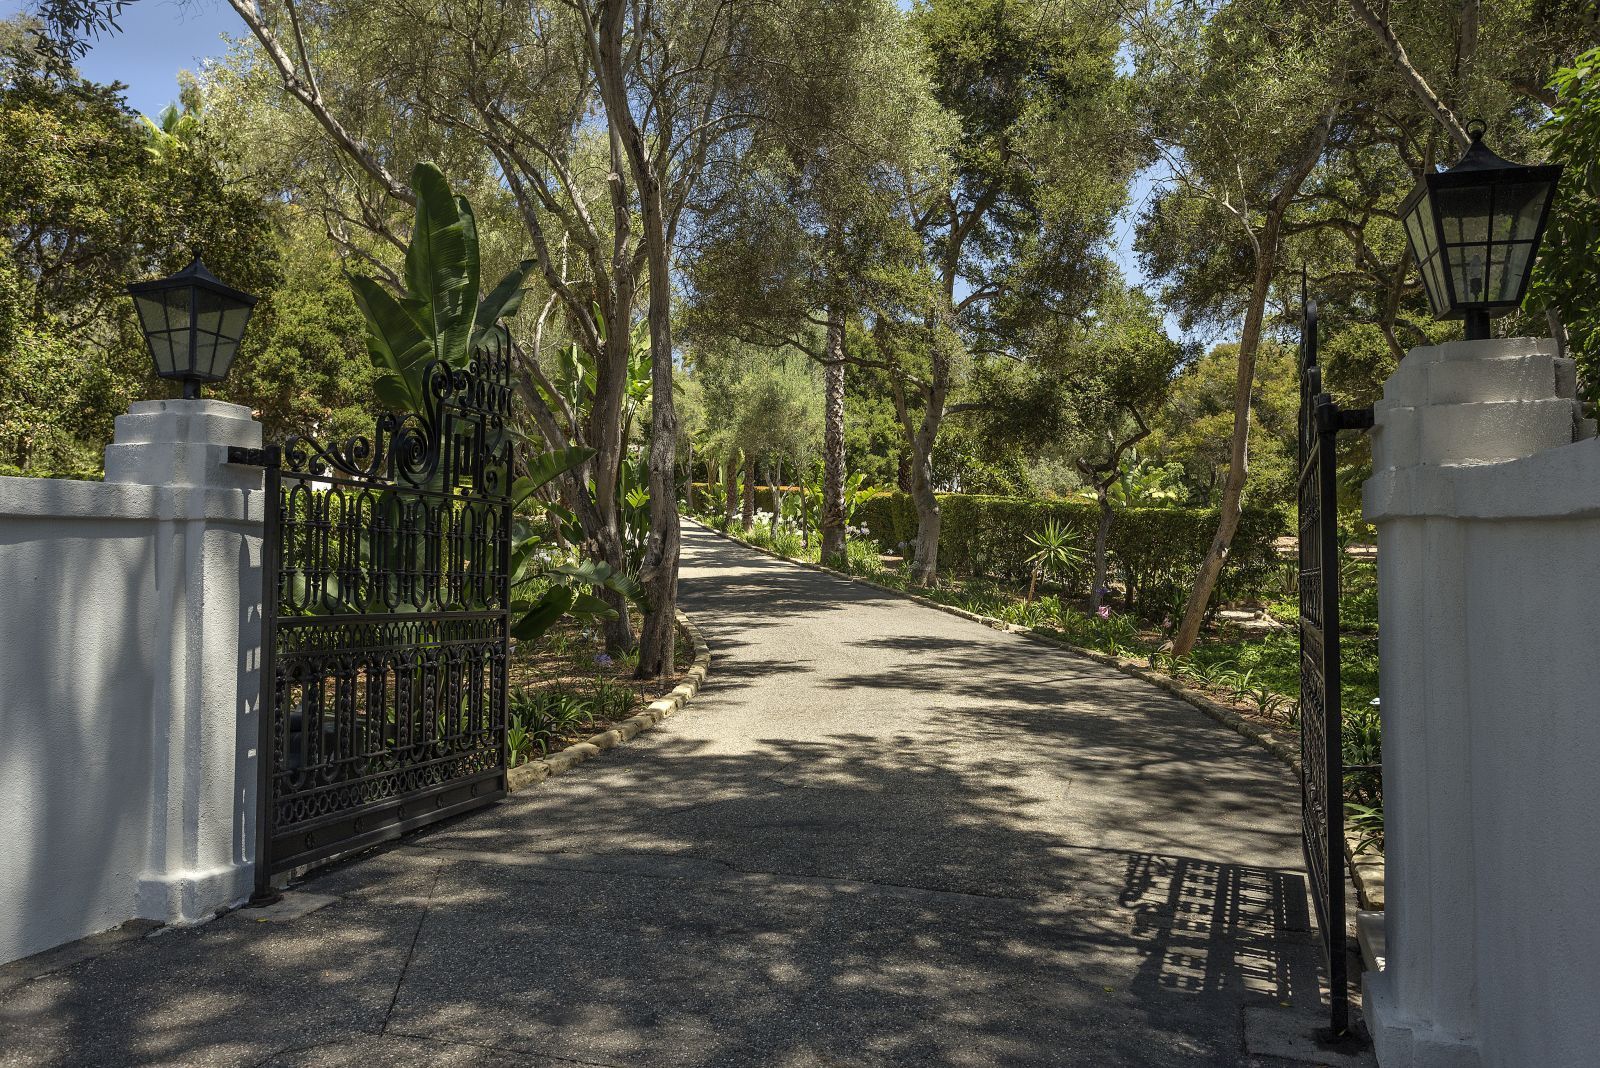 An entry gate opens to a long driveway lined with trees.